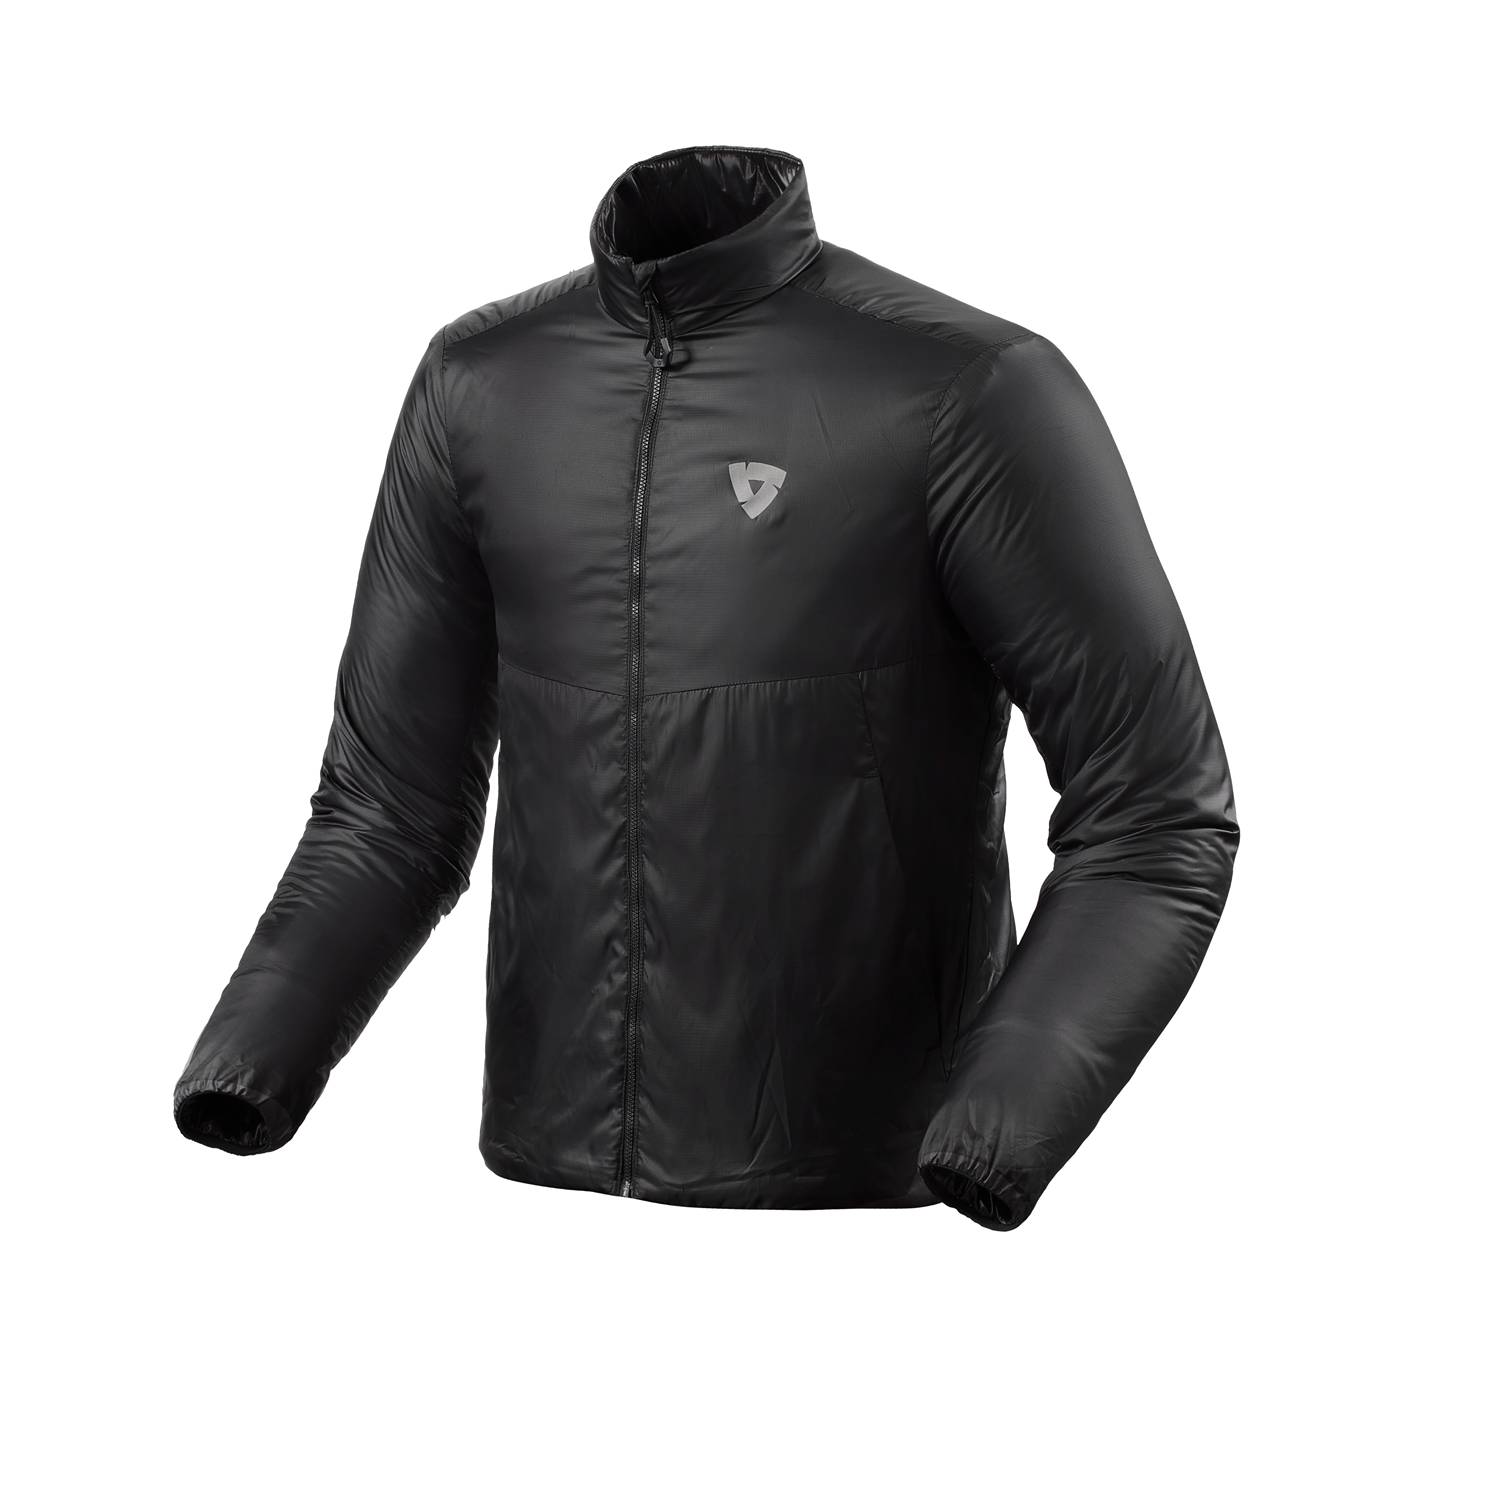 Image of REV'IT! Core 2 Mid Layer Jacket Black Taille S